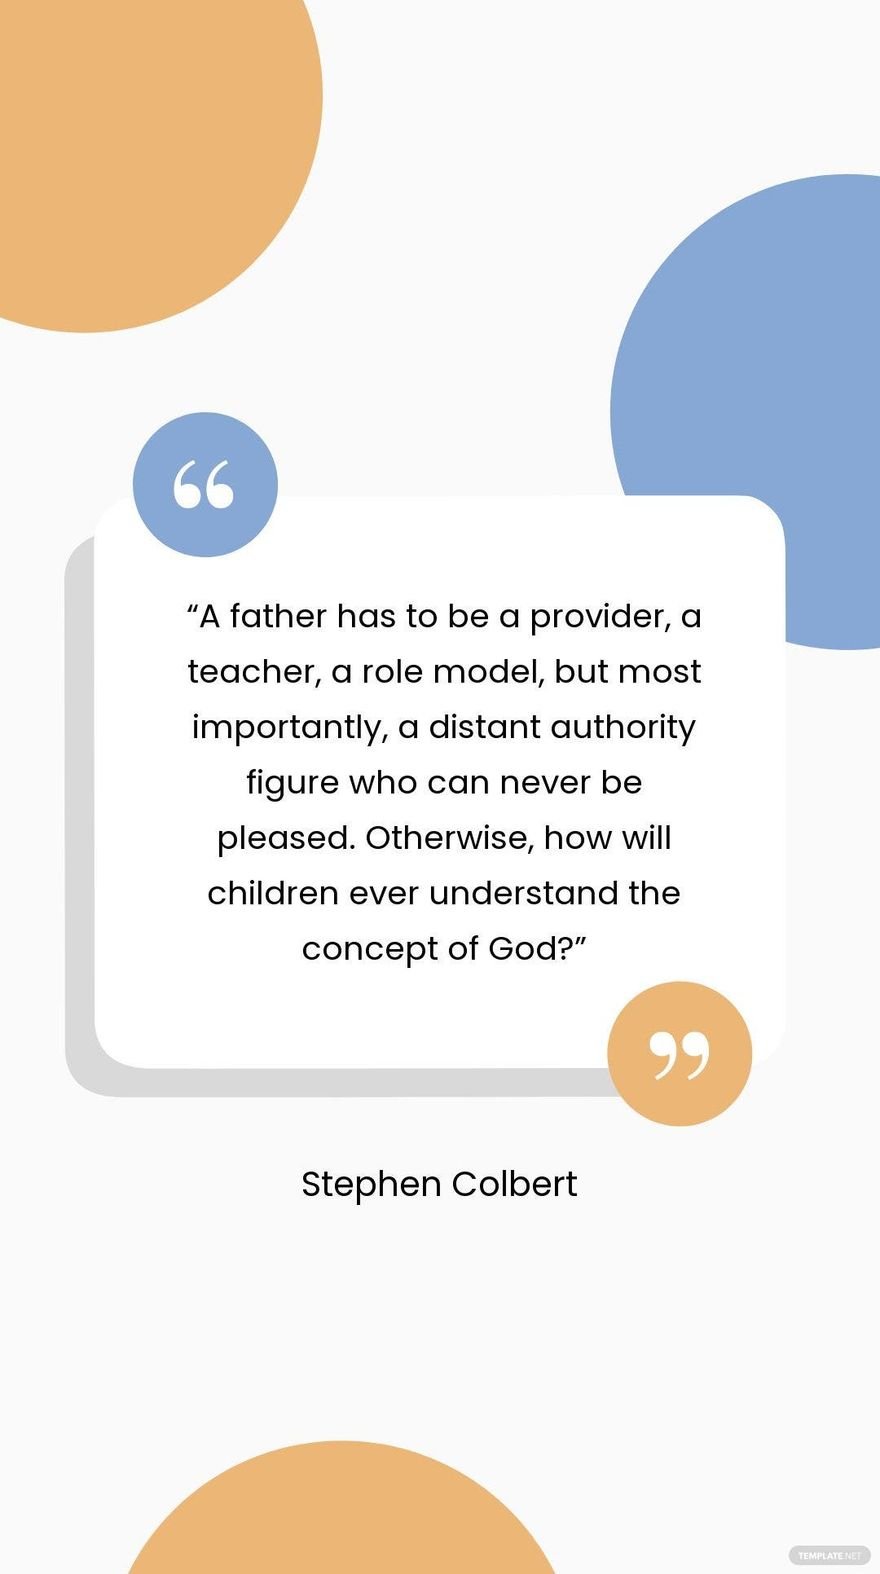 Free  Stephen Colbert - A father has to be a provider, a teacher, a role model, but most importantly, a distant authority figure who can never be pleased. Otherwise, how will children ever understand the c